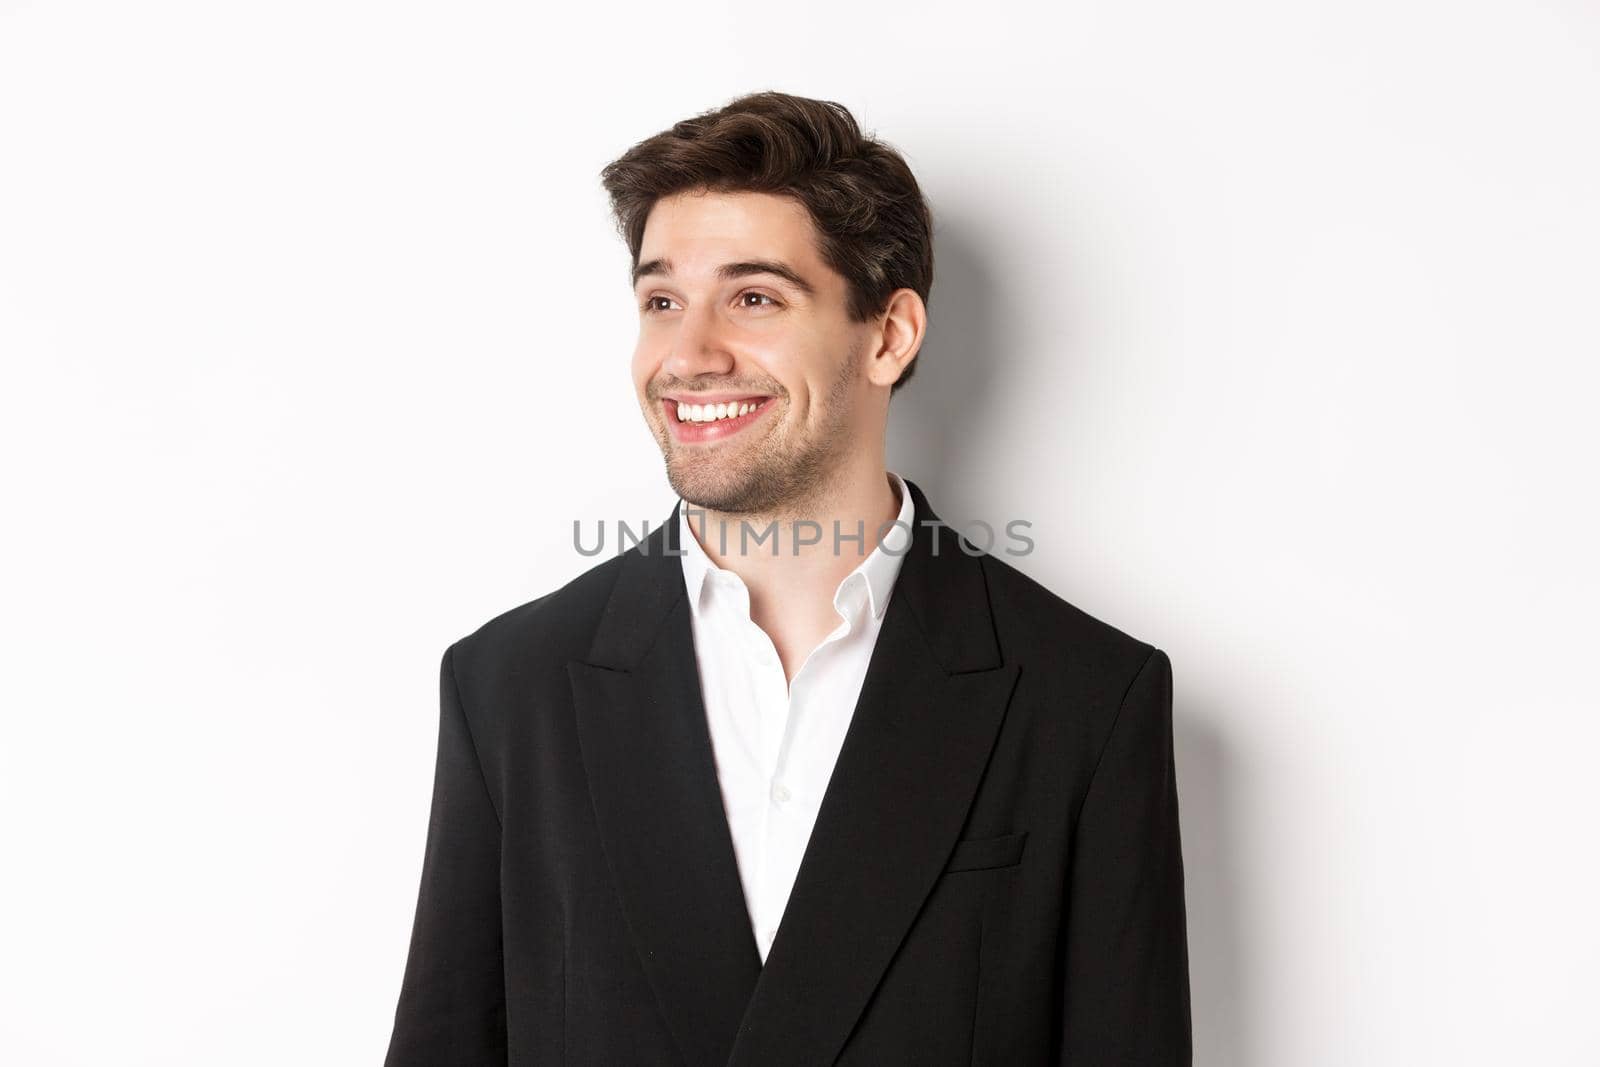 Close-up of handsome male entrepreneur in suit, looking left and smiling, standing against white background.